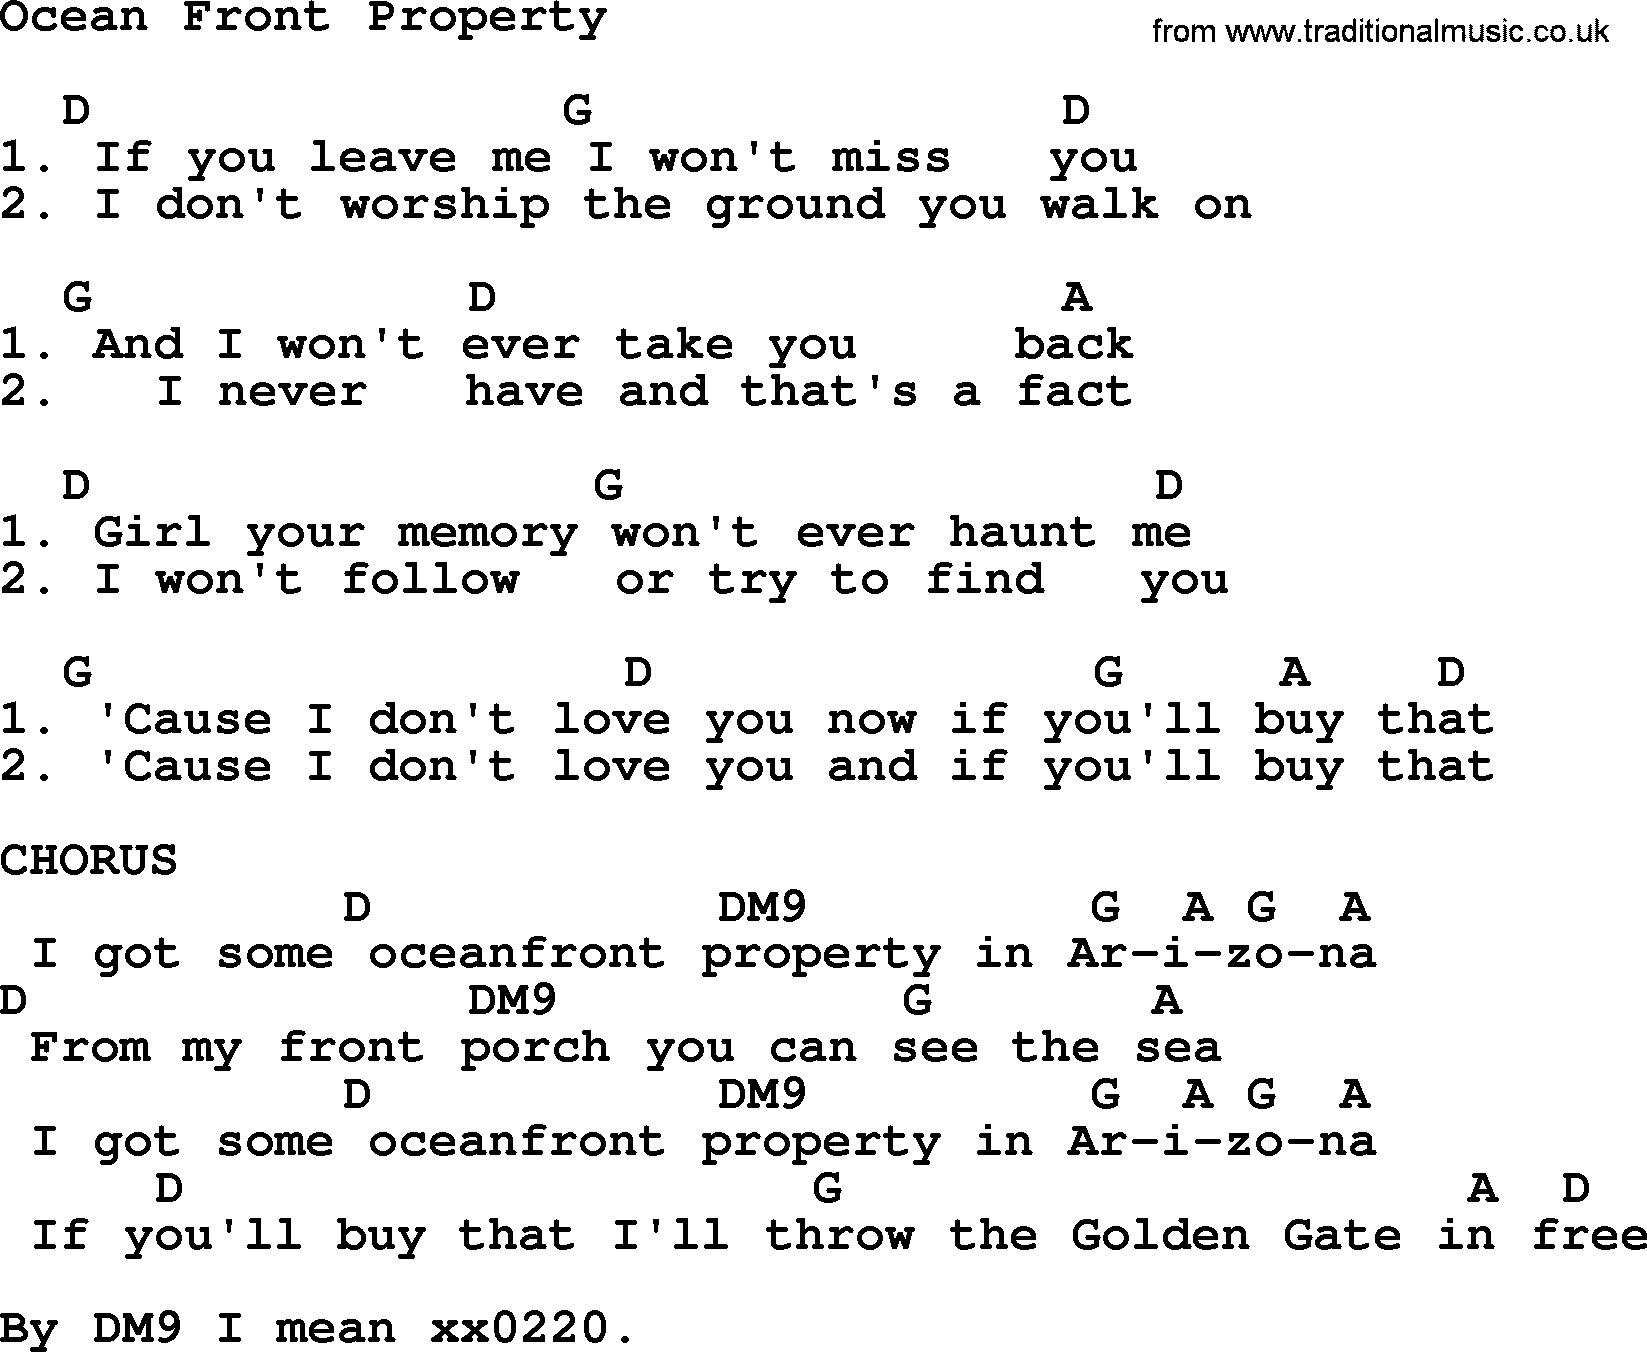 George Strait song: Ocean Front Property, lyrics and chords